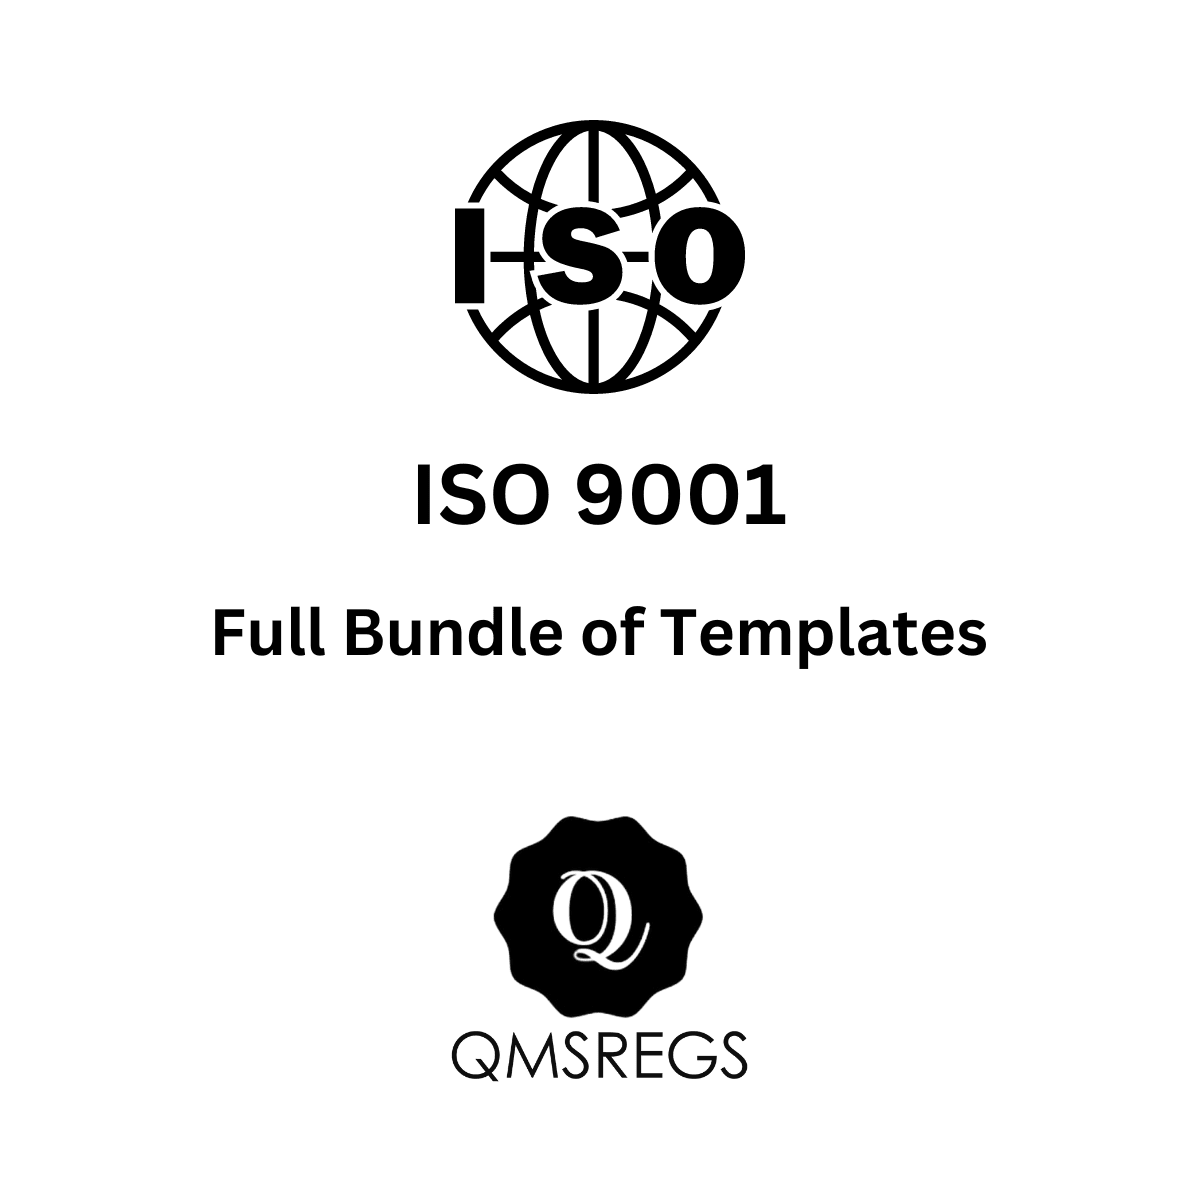 ISO 9001 full bundle of templates